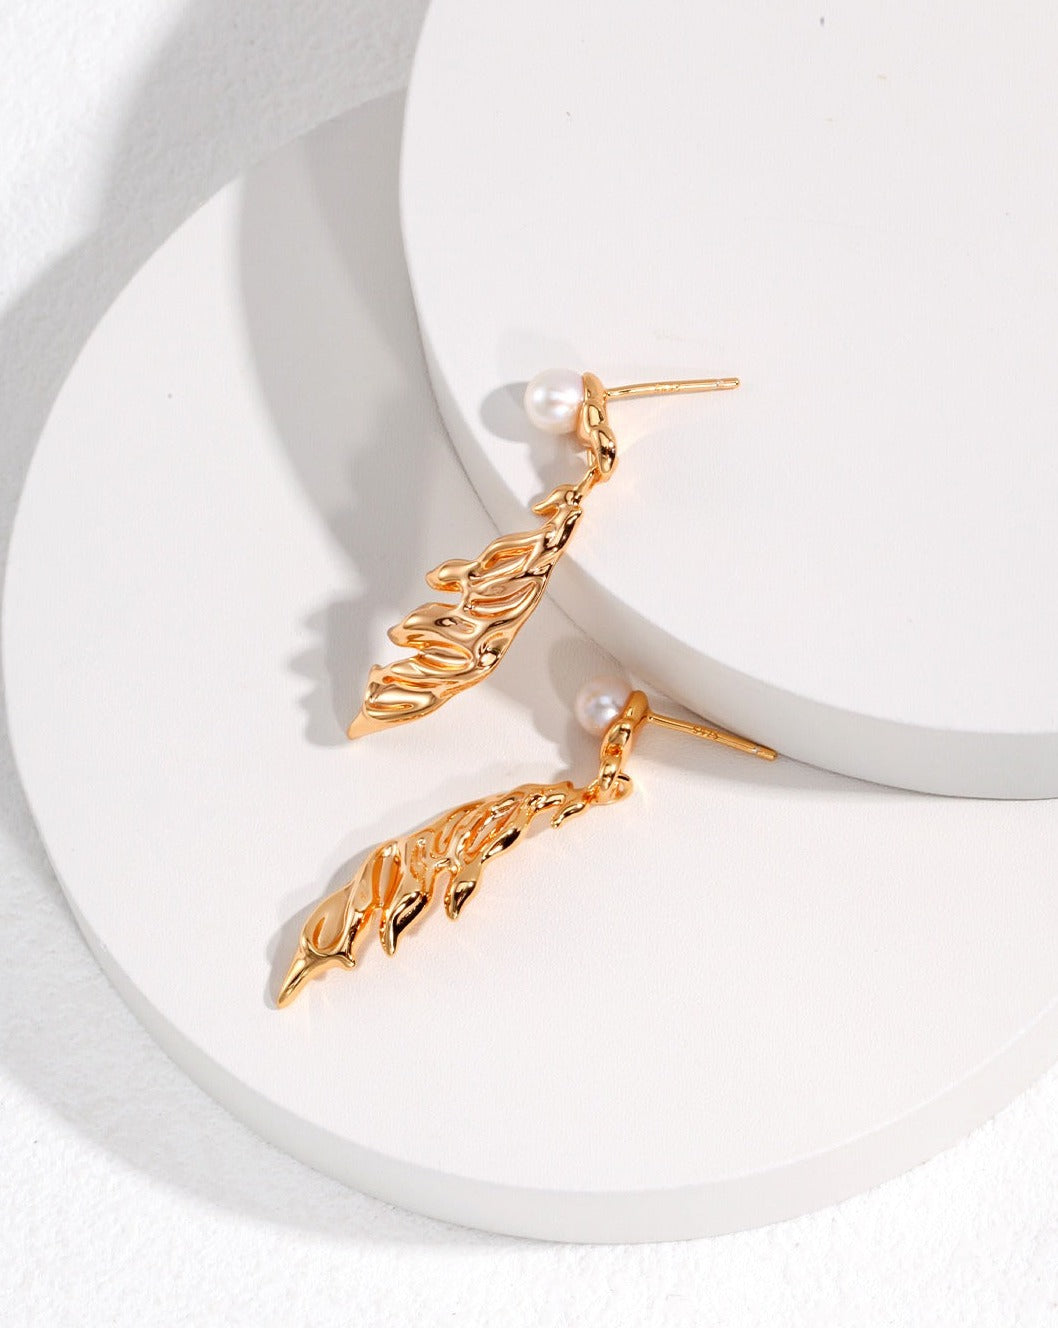 fashion-jewelry-minimalist-jewelry-design-jewelry-statement-necklace-pearl-earring-bracelet-rings-gold-coated-silver-bijoux-feather-in-the-wind-pearl-earrings-necklace-retro-gold